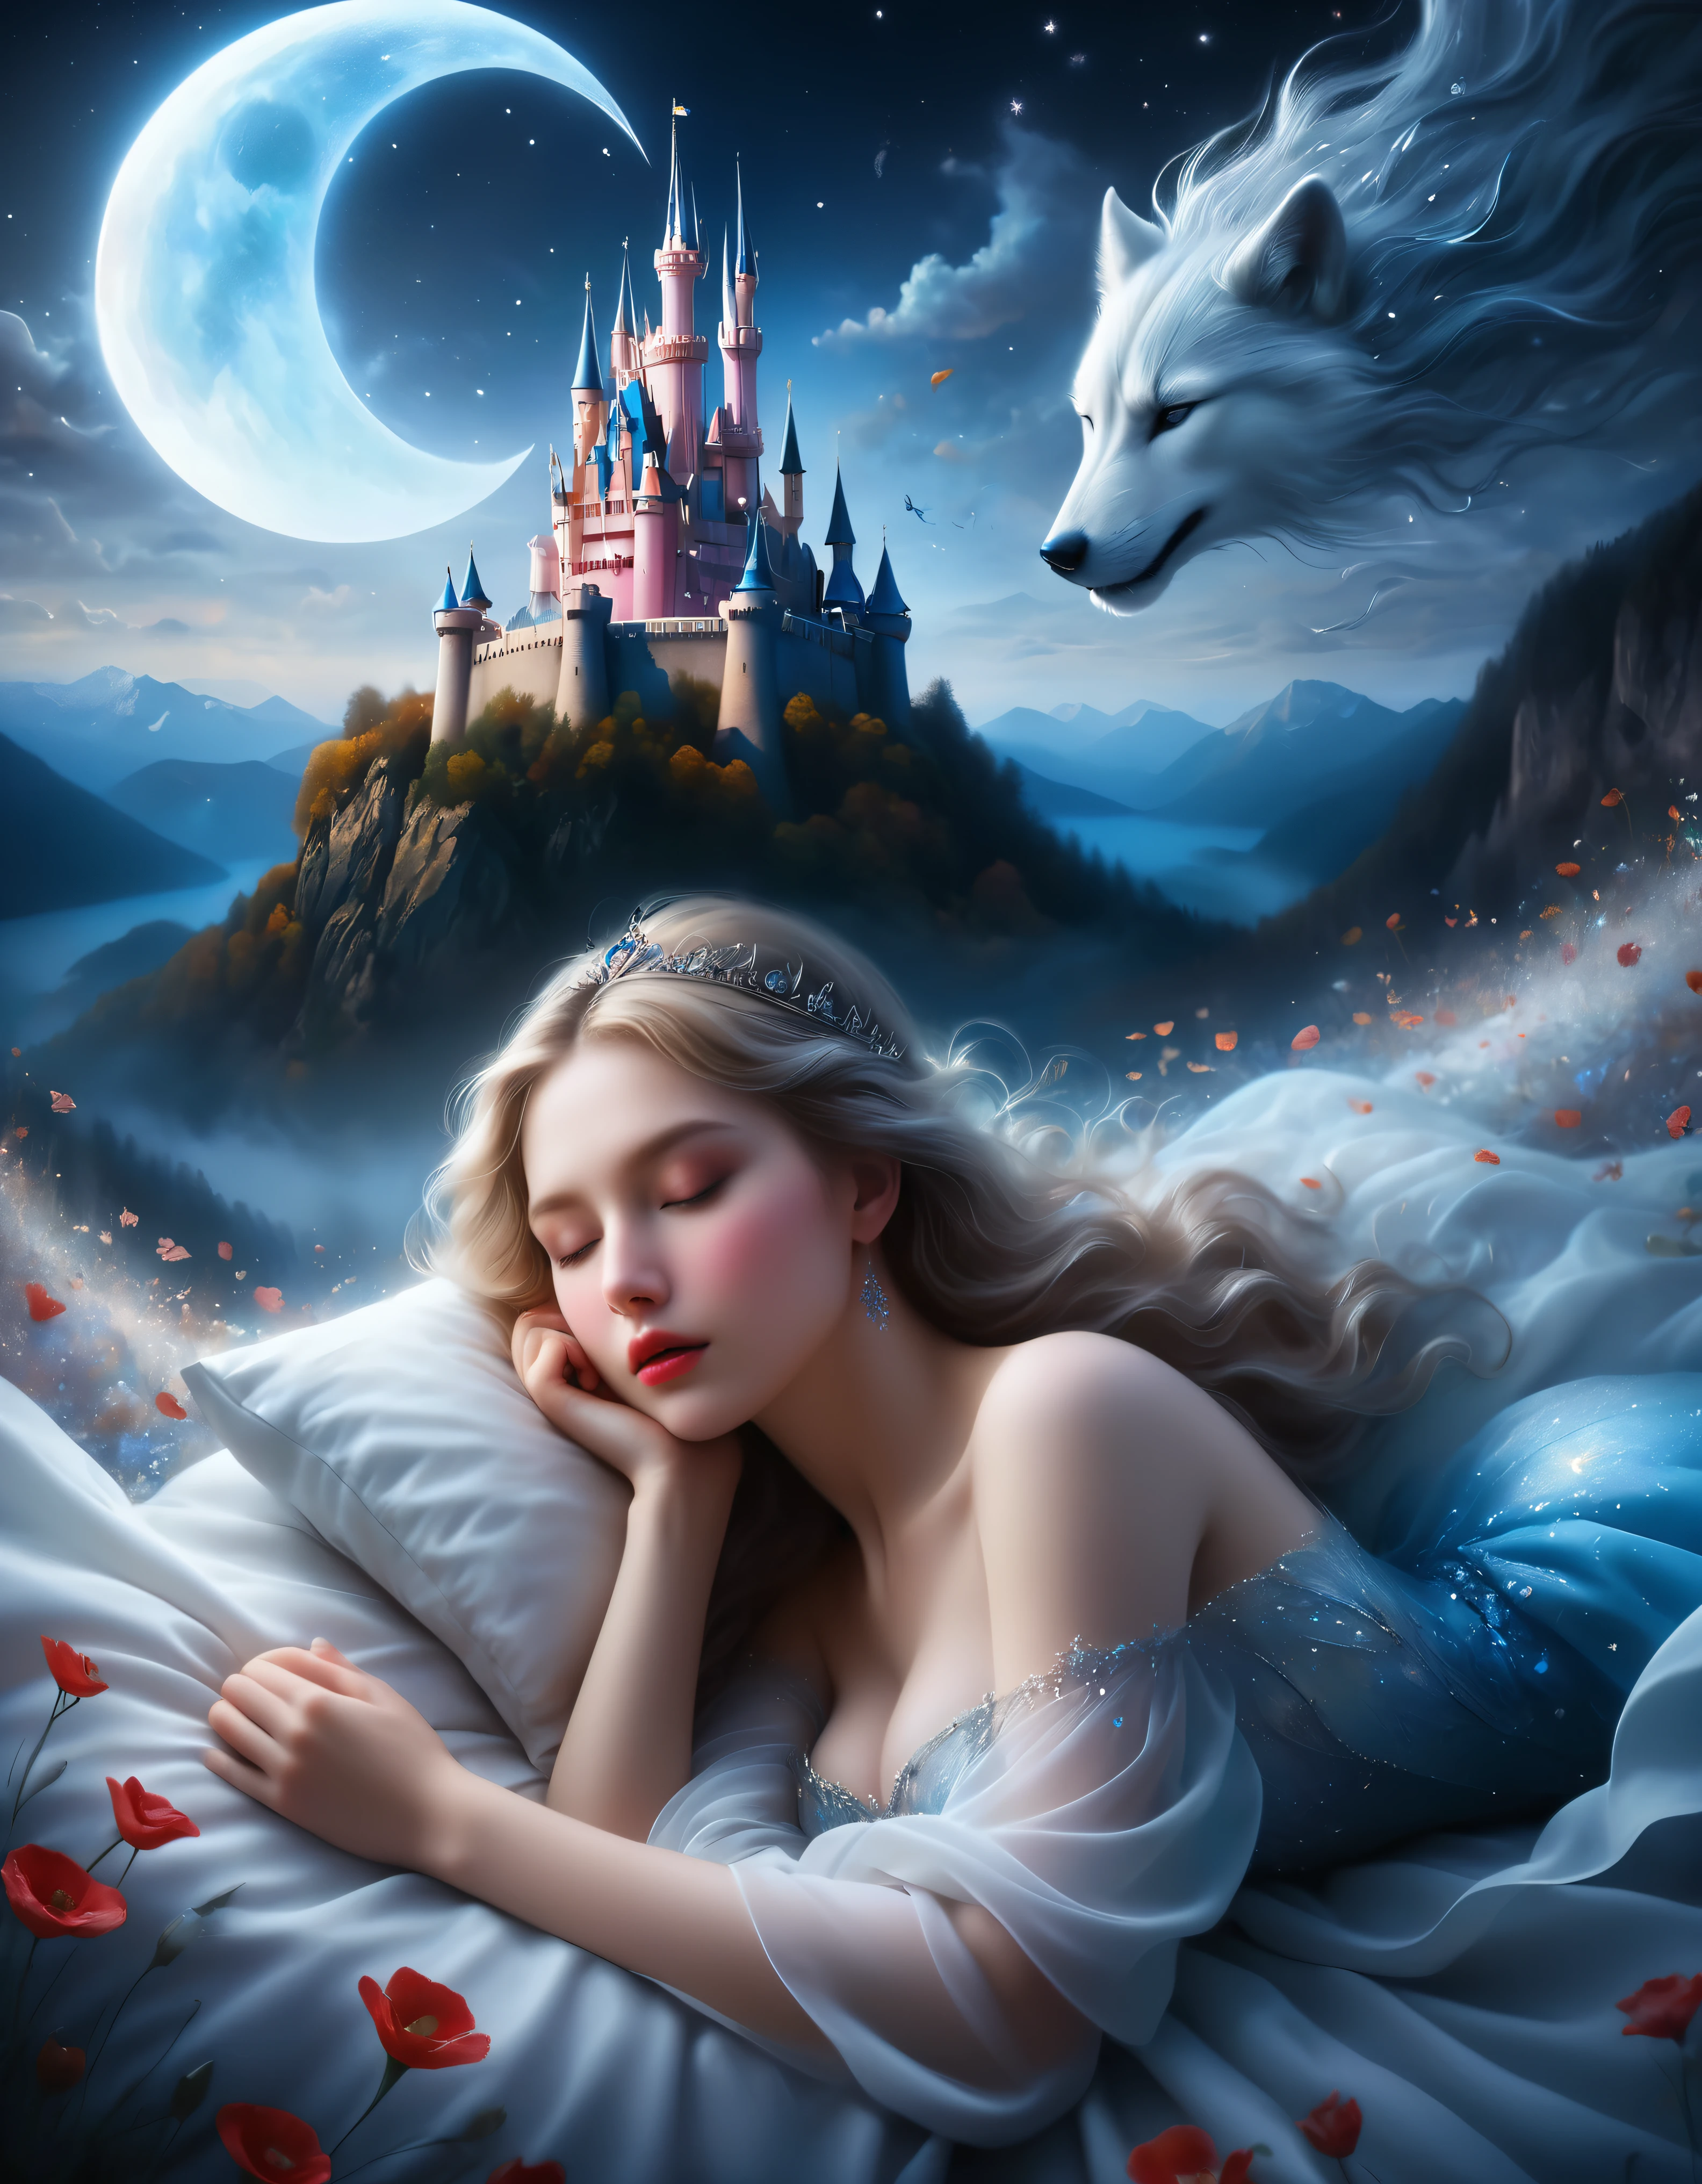 ((Masterpiece in maximum 16K resolution):1.6),((soft_color_photograpy:)1.5), ((Ultra-Detailed):1.4),((Movie-like still images and dynamic angles):1.3) | (double contact:1.3), Beautiful dream castle silhouette effect, Superimposed on Sleeping Beauty,《Sleeping Beauty Theme》, ((Sleeping beauty dream castle):1.5), Oil and ink on canvas, fine art, super dramatic light, photoillustration, amazing depth, the ultra-detailed, iridescent red, superfluous dreams, intricately details, amazing depth, Amazing atmosphere, Mesmerizing whimsical vibrant landscapes, Maximalism (beautiful outside, Ugly inside, pressure and pain, beauty and despair, hard and soft, positive and negative, hot and cold, Sweet and sour, Vibrant but boring, Perfect harmony, light and shadows, hot and cold, old and young, Fire and ice, Yin and yang, australian, Black and white, hot and cold, organic and mechanical, Corresponding color, loud and quiet, Chaos and peace, day and night:1.2) The complex masterpiece of a real-time engineering leader. | Rendered in ultra-high definition with UHD and retina quality, this masterpiece ensures anatomical correctness and textured skin with super detail. With a focus on high quality and accuracy, this award-winning portrayal captures every nuance in stunning 16k resolution, immersing viewers in its lifelike depiction. | ((perfect_composition, perfect_design, perfect_layout, perfect_detail, ultra_detailed)), ((enhance_all, fix_everything)), More Detail, Enhance.